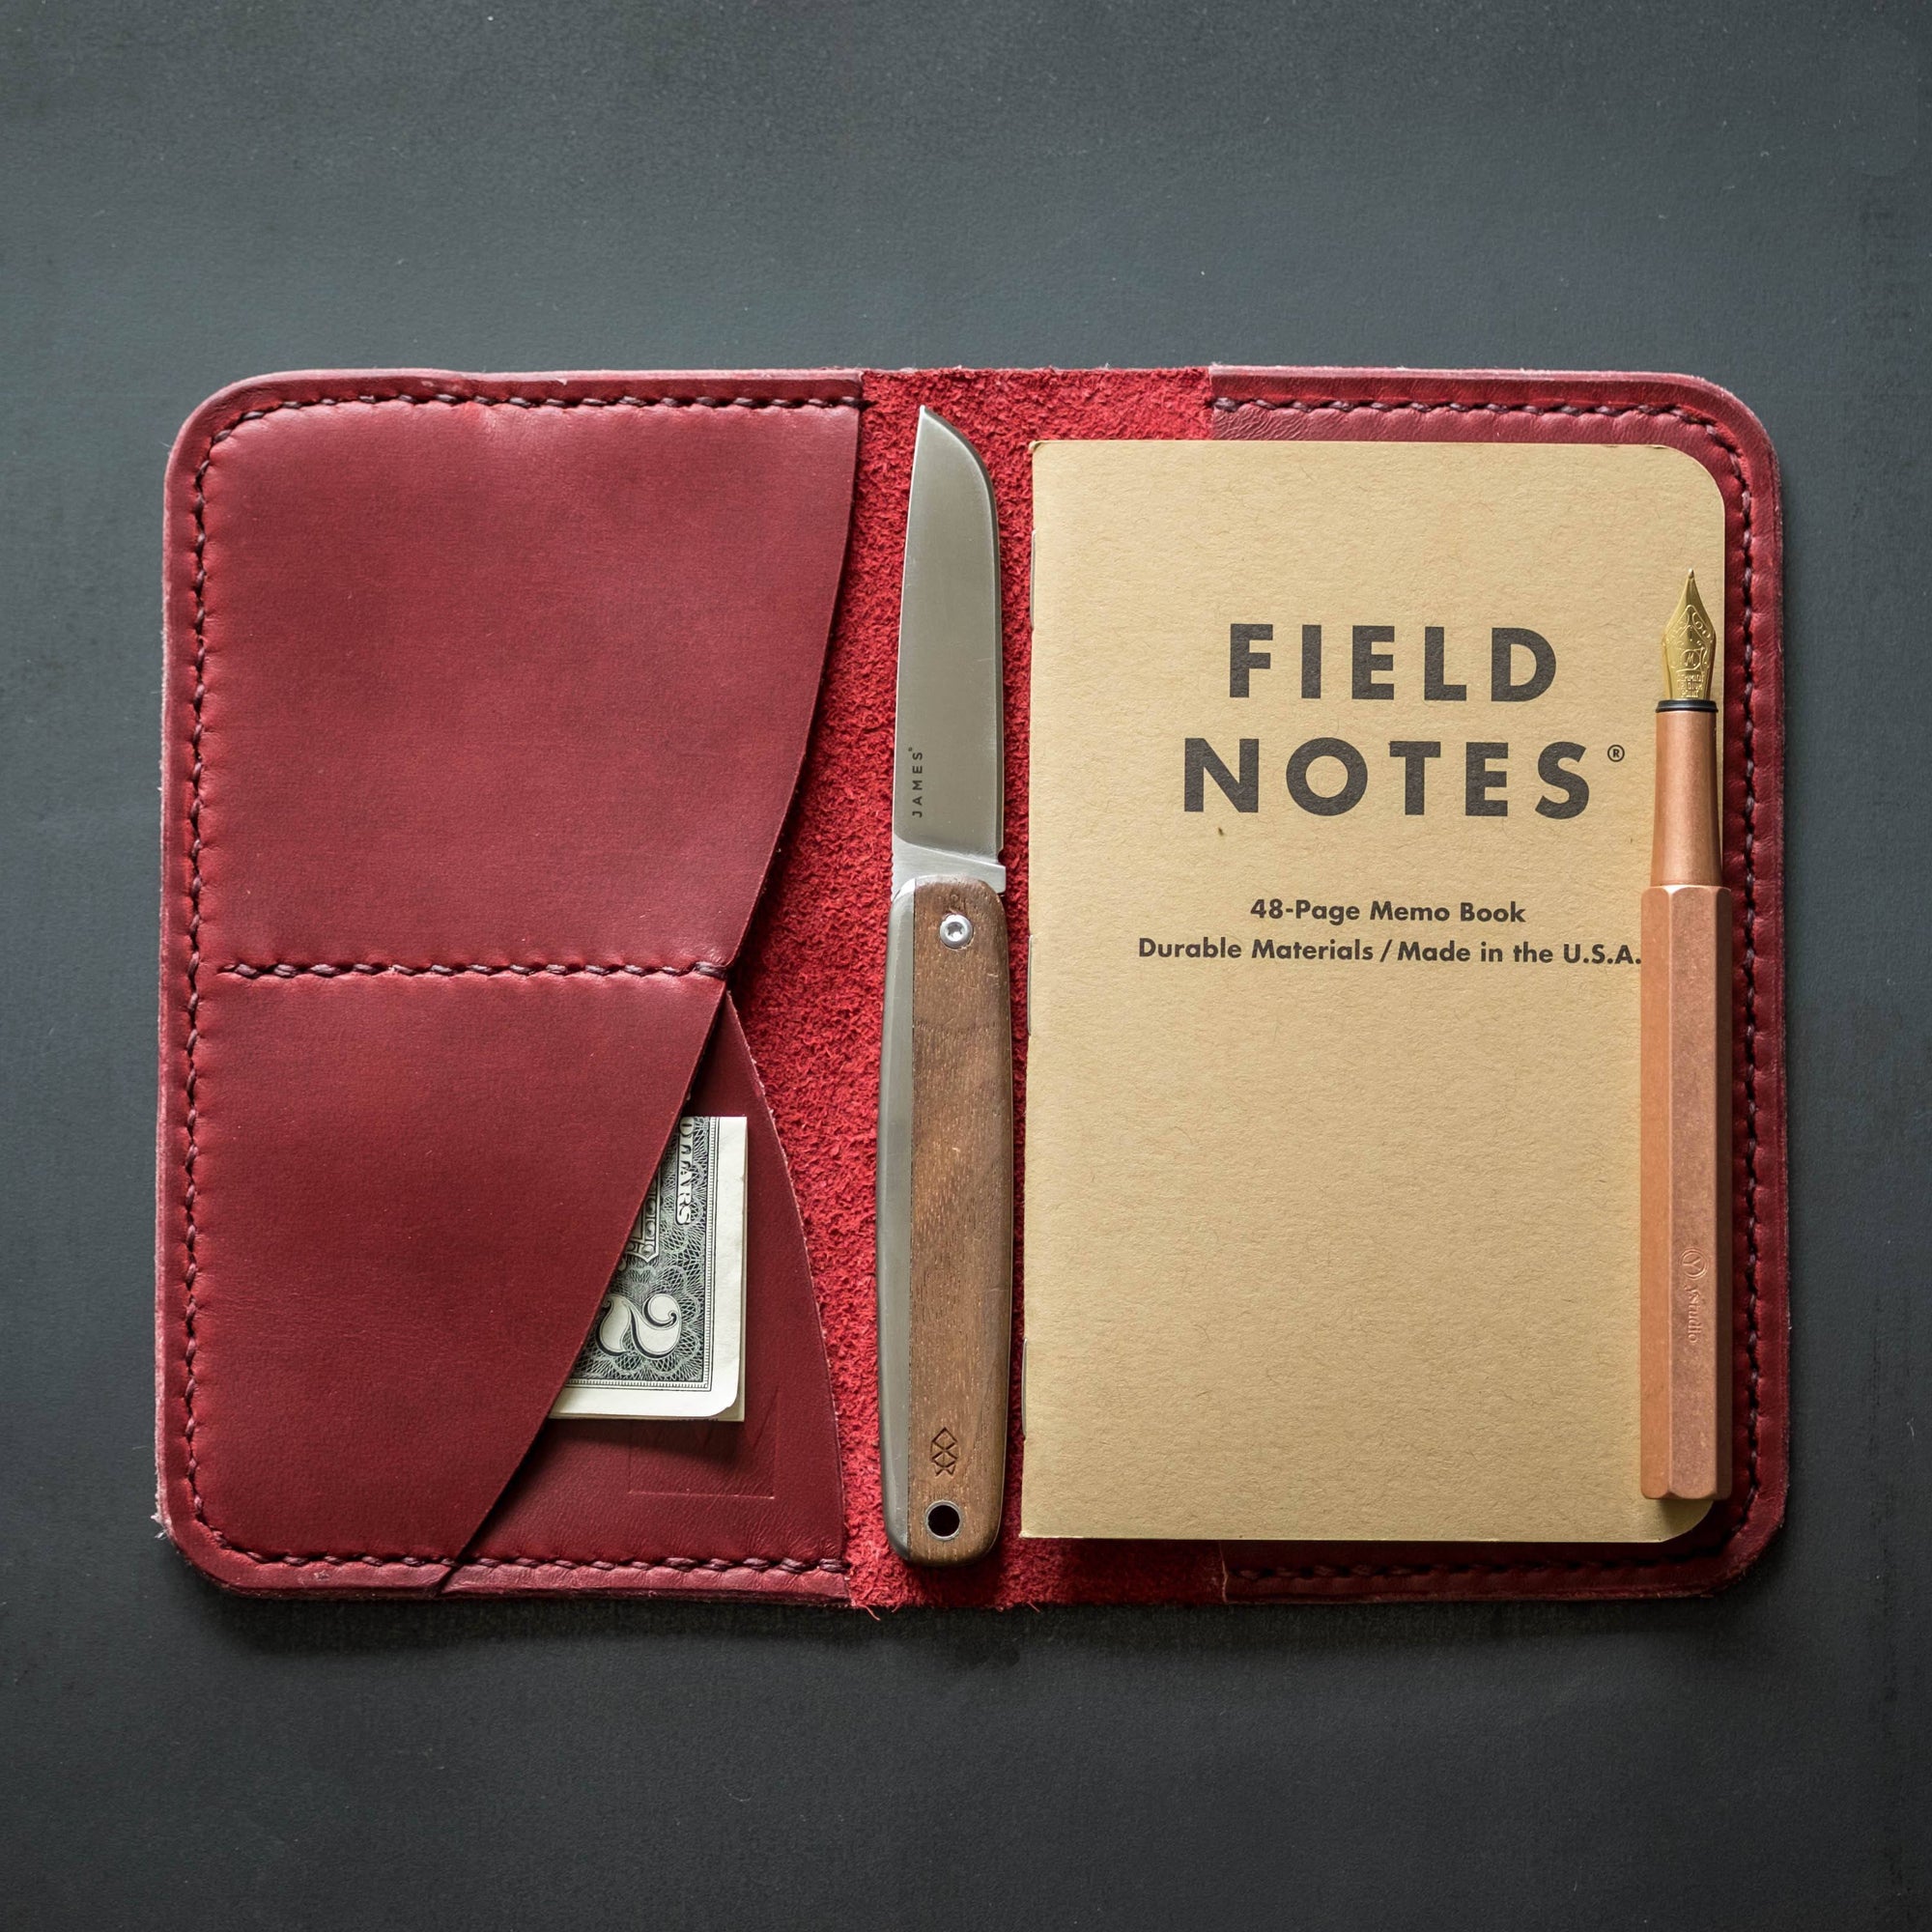 James & DDC: Field Notes 3 Pack by The James Brand